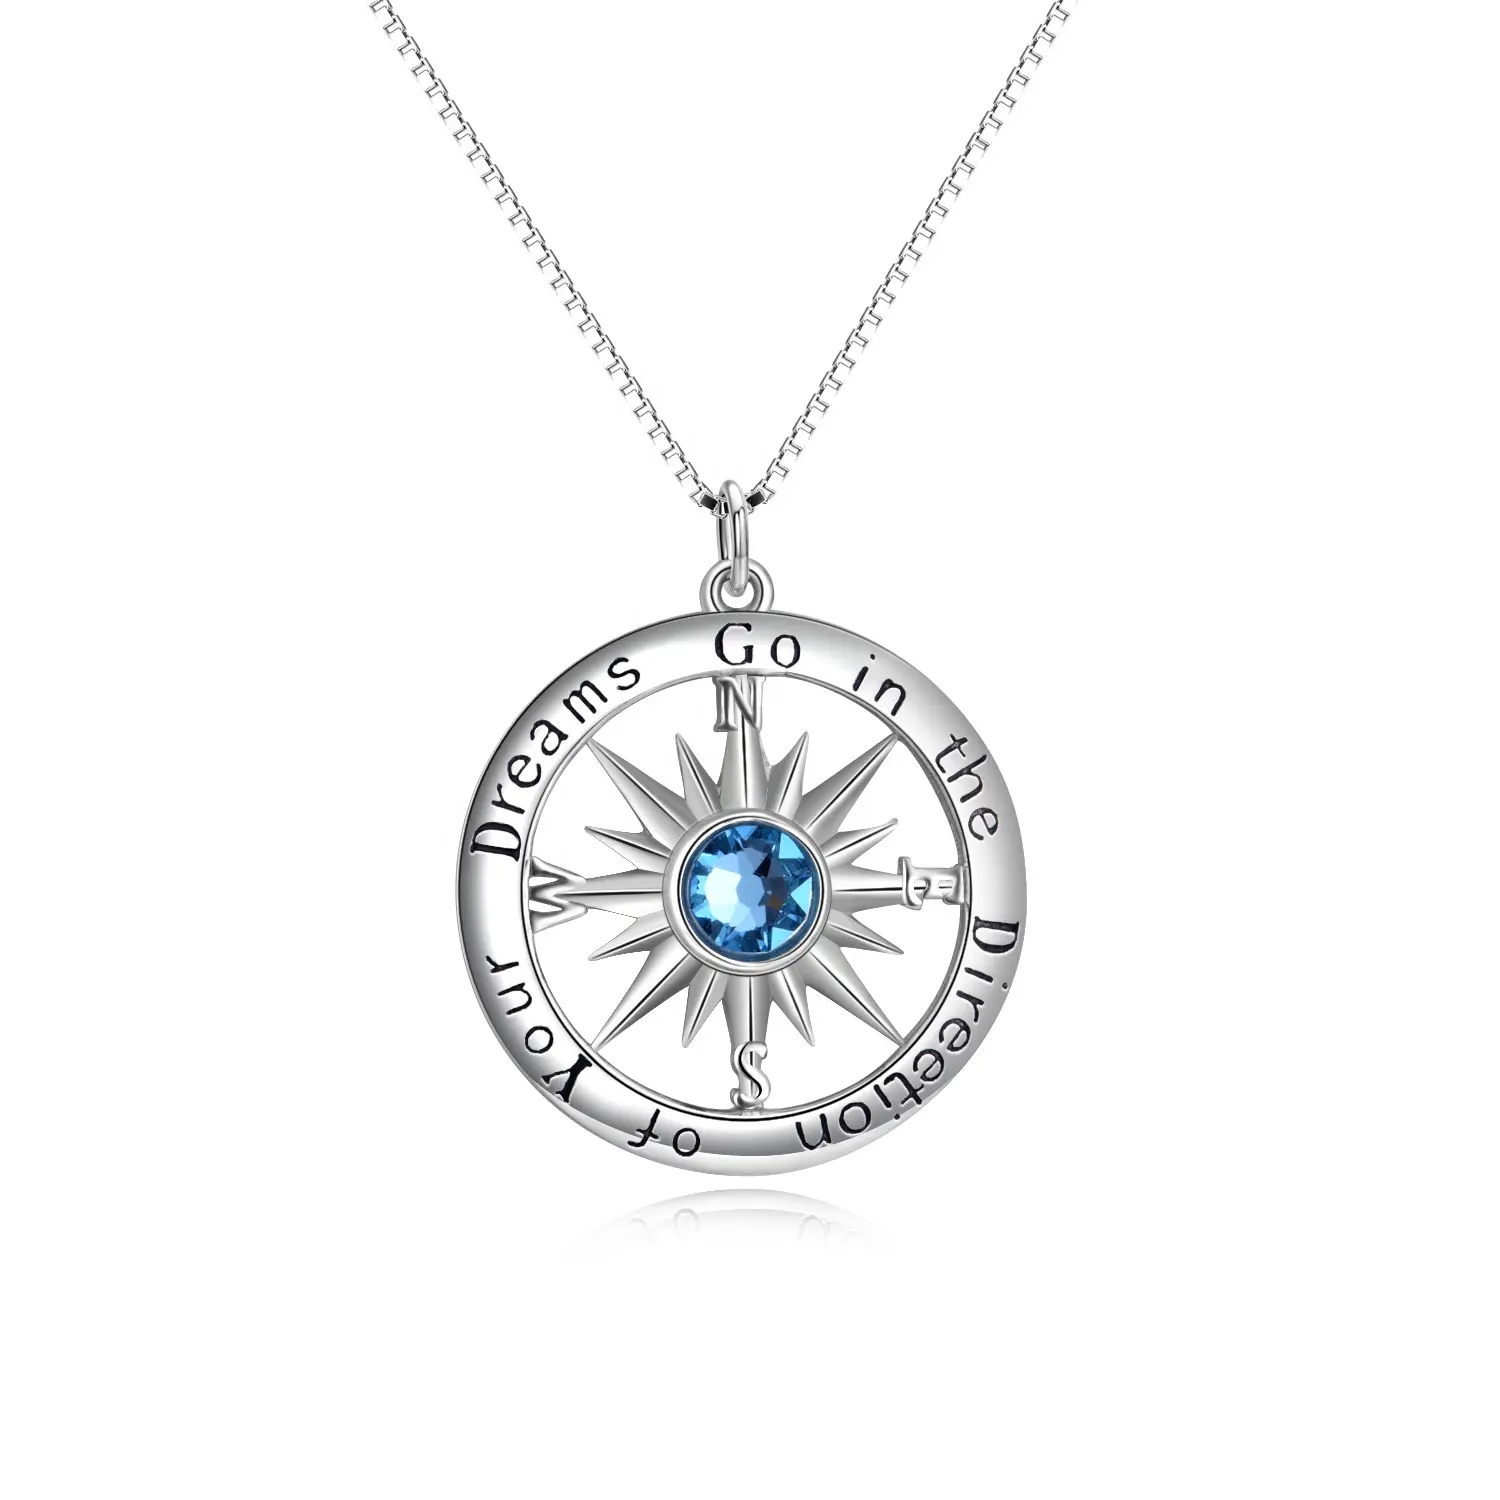 Go In The Dircetion Of Your Dreams Sterling Silver Jewelry Compass Pendant Necklace For Men Women